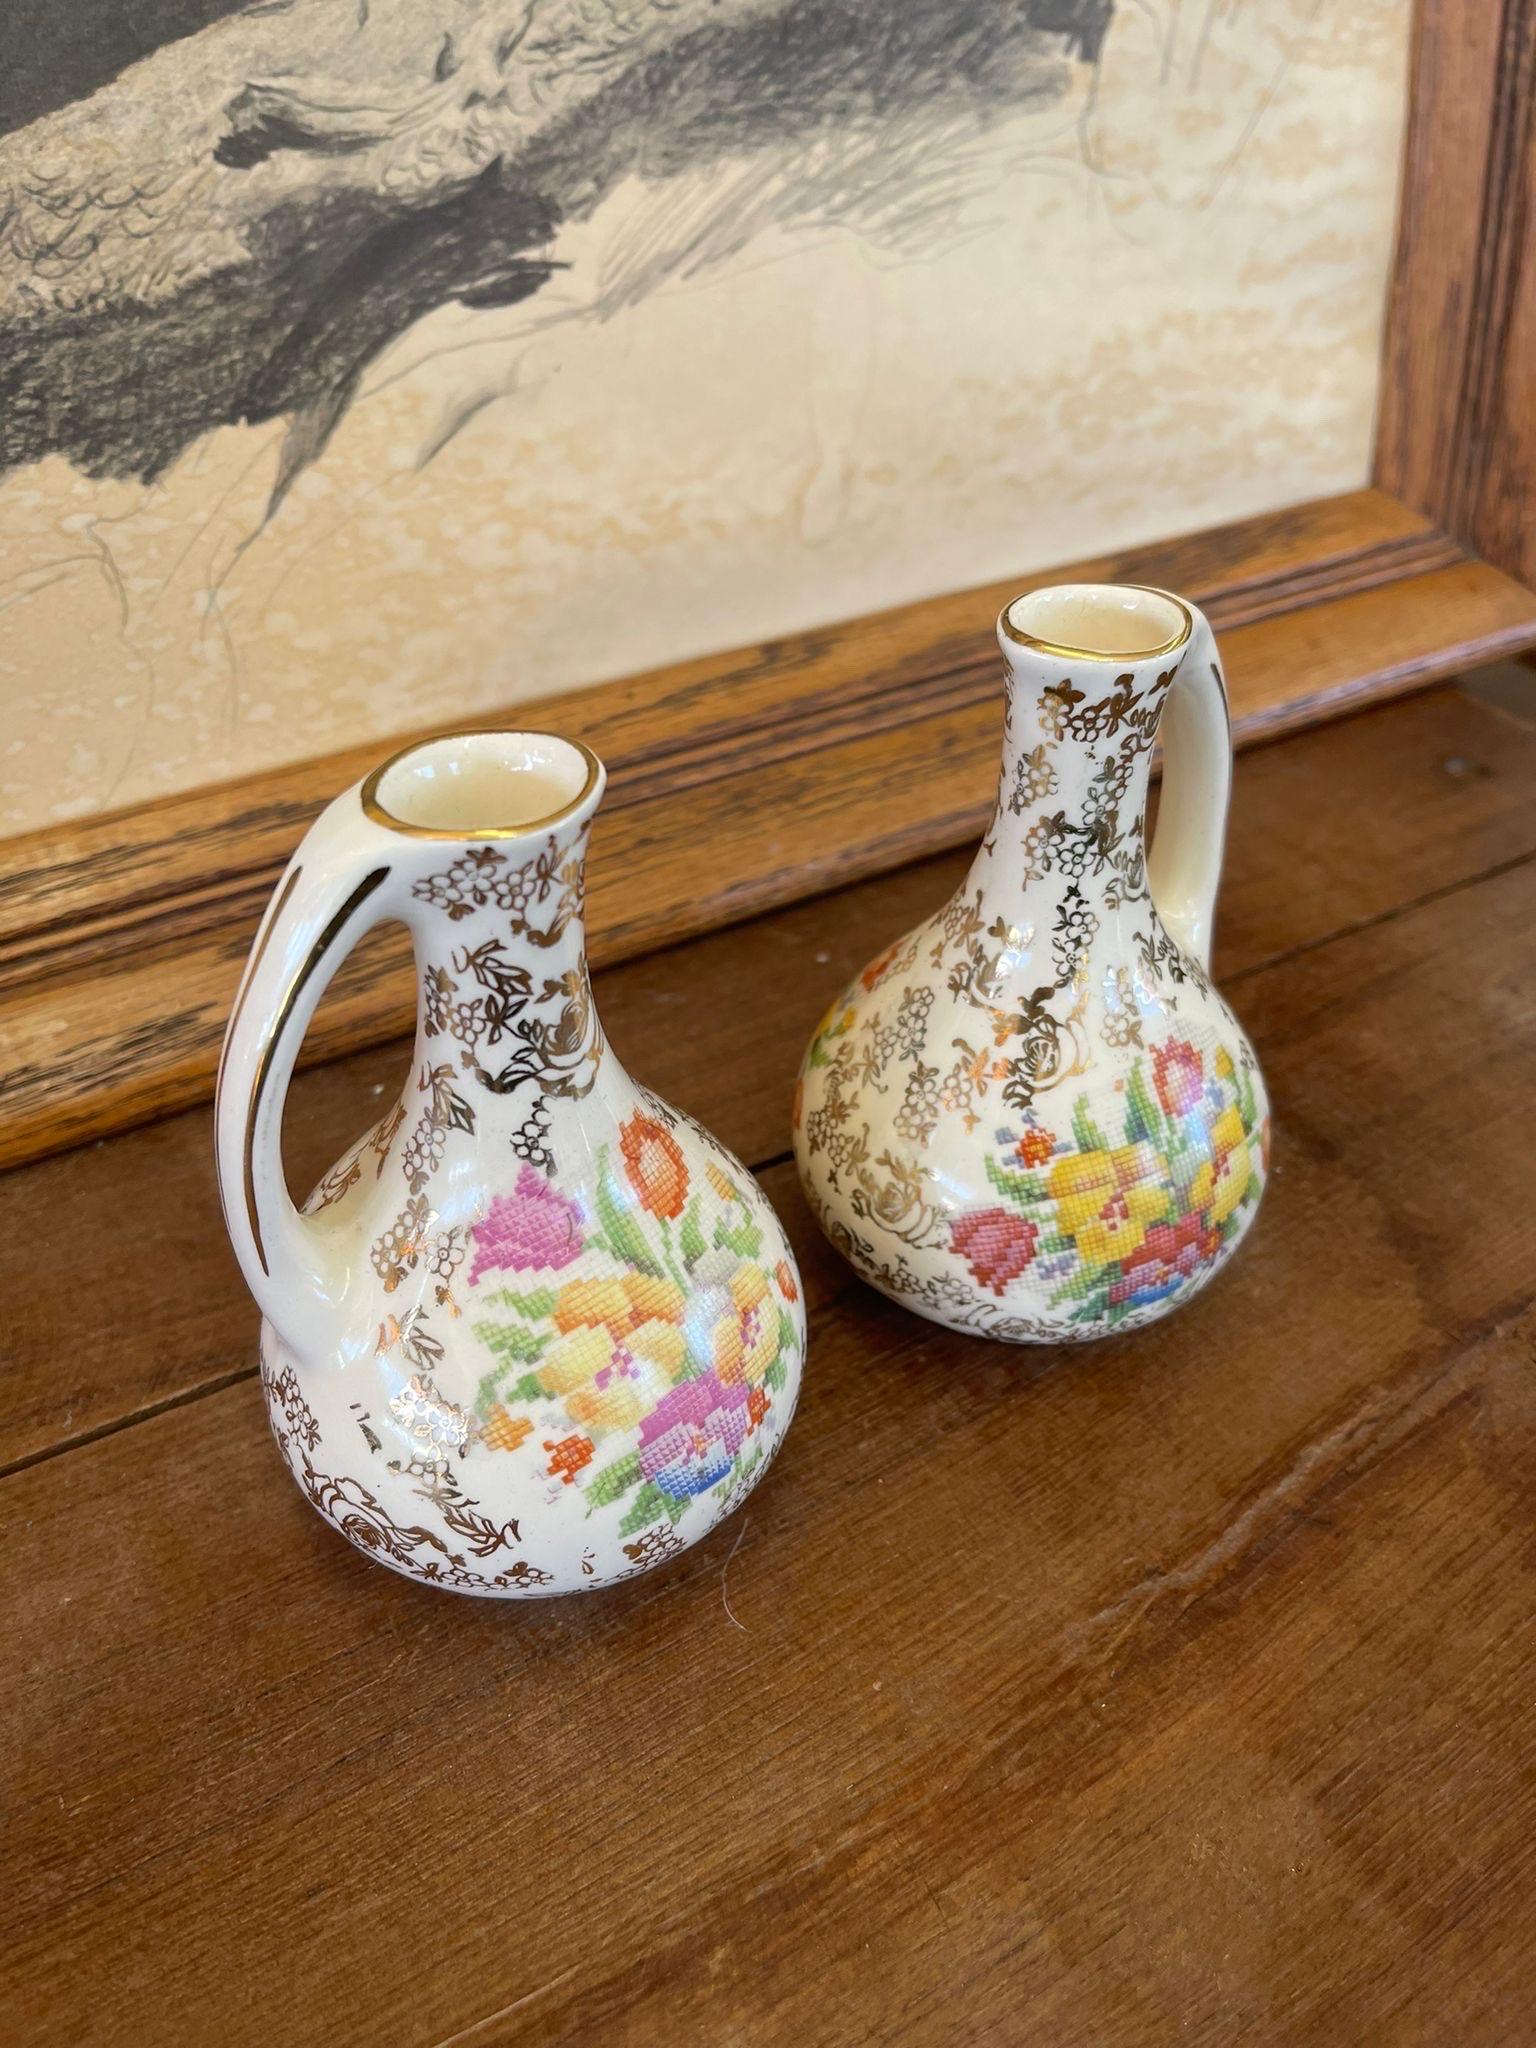 Vases are Covered with Gold Toned Flower Motifs with Central Images of Embroidered Bouquet. Makers Mark on Bottom Stating Made in England as Pictured.

Dimensions. 3 W ; 3 D ; 5 H